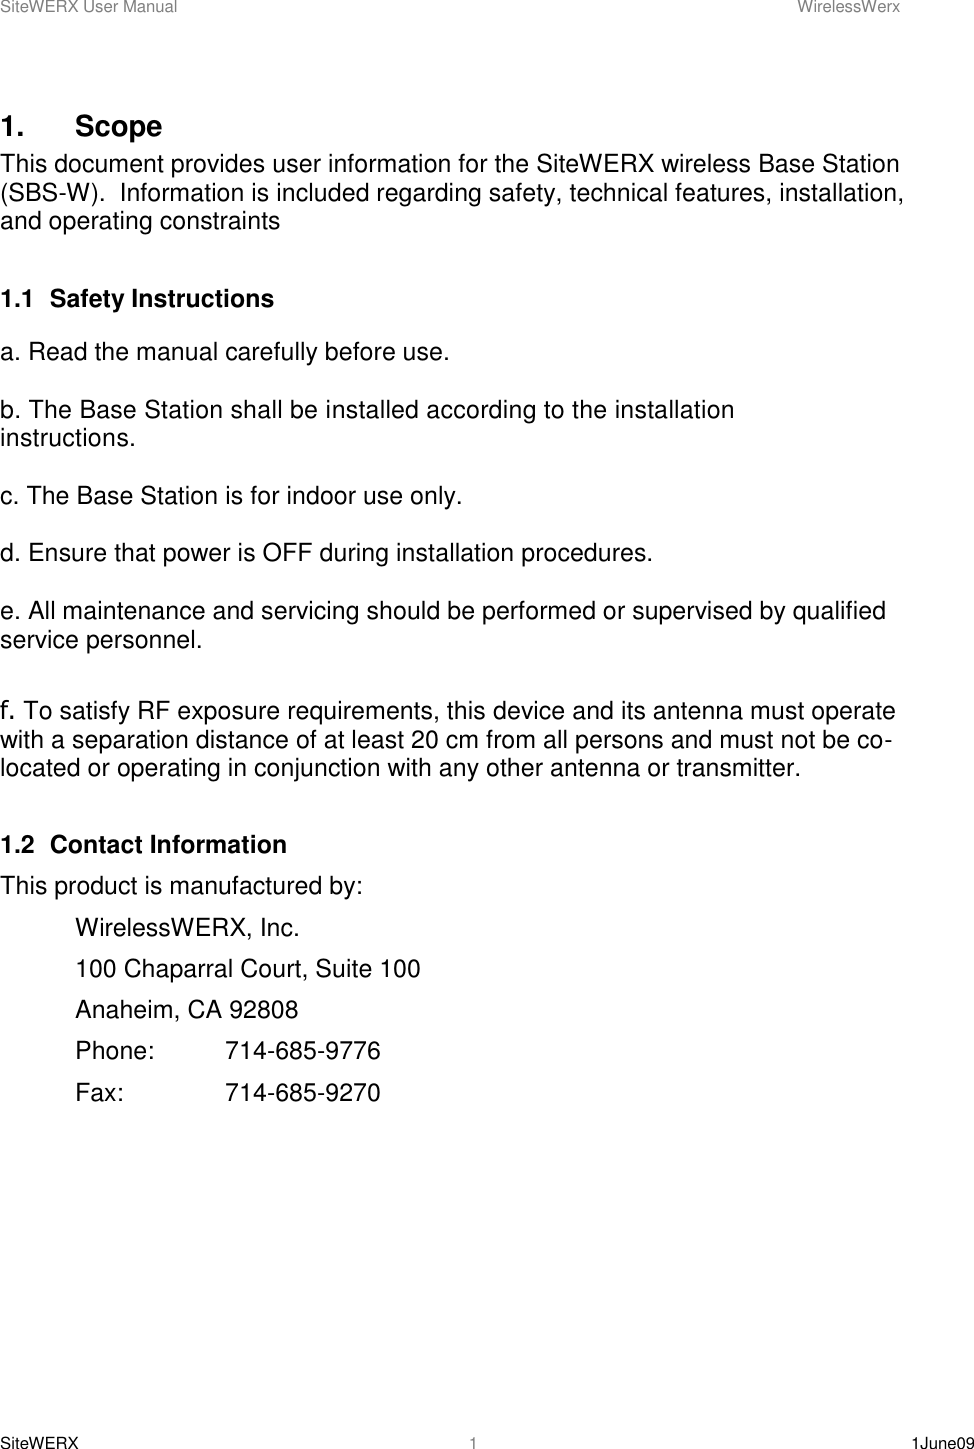 SiteWERX User Manual    WirelessWerx SiteWERX    1June09  1 1.    Scope This document provides user information for the SiteWERX wireless Base Station (SBS-W).  Information is included regarding safety, technical features, installation, and operating constraints  1.1  Safety Instructions  a. Read the manual carefully before use.  b. The Base Station shall be installed according to the installation instructions.   c. The Base Station is for indoor use only.  d. Ensure that power is OFF during installation procedures.  e. All maintenance and servicing should be performed or supervised by qualified service personnel.  f. To satisfy RF exposure requirements, this device and its antenna must operate with a separation distance of at least 20 cm from all persons and must not be co-located or operating in conjunction with any other antenna or transmitter.   1.2  Contact Information This product is manufactured by:   WirelessWERX, Inc.   100 Chaparral Court, Suite 100   Anaheim, CA 92808   Phone:  714-685-9776   Fax:    714-685-9270  